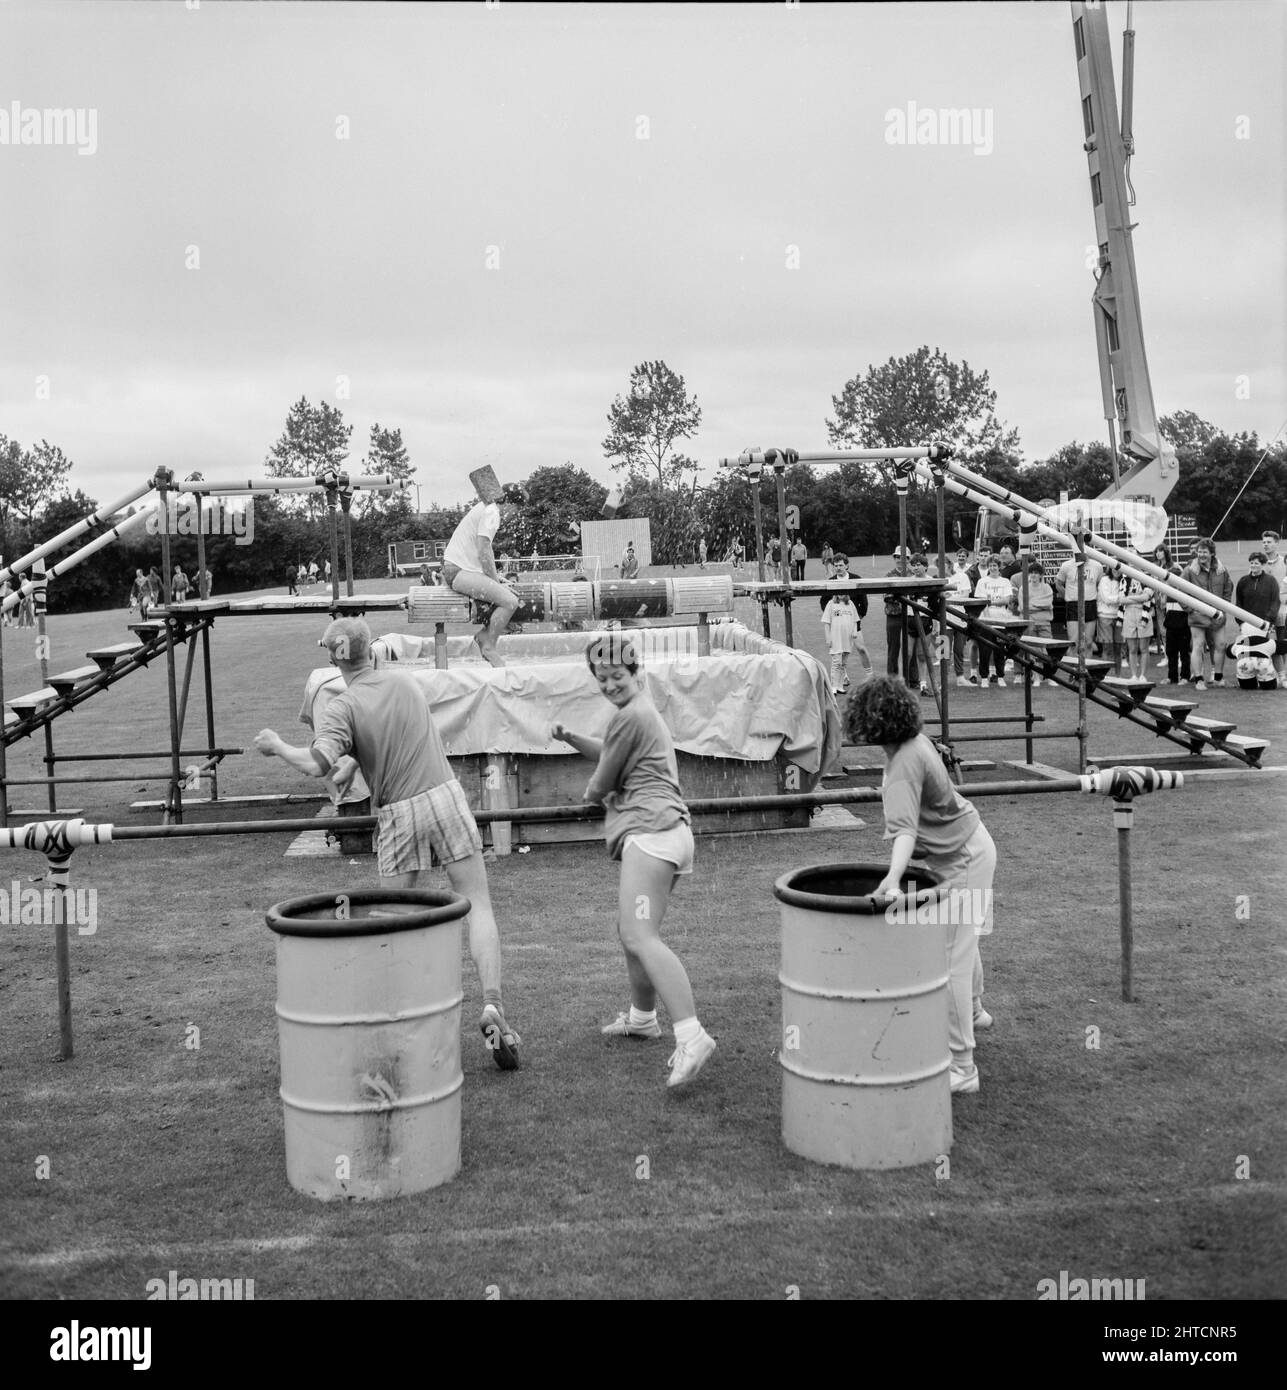 Laing Sports Ground, Rowley Lane, Elstree, Barnet, London, 11/06/1988. Three people throwing wet sponges at a man attempting to cross a spinning balance beam over a tank of water, part of the 'It's a Knockout' competition at the 1988 Family Day at Laing's Sports Ground. Attractions at that year's Family Day included; a parade of vintage cars, helicopter rides, plate smashing, stalls, an 'It's a Knockout' style competition and tennis and six-a-side football tournaments.  The event was opened by John Conteh, former world light heavy weight champion and ended with a barbecue and disco. The 'It's Stock Photo